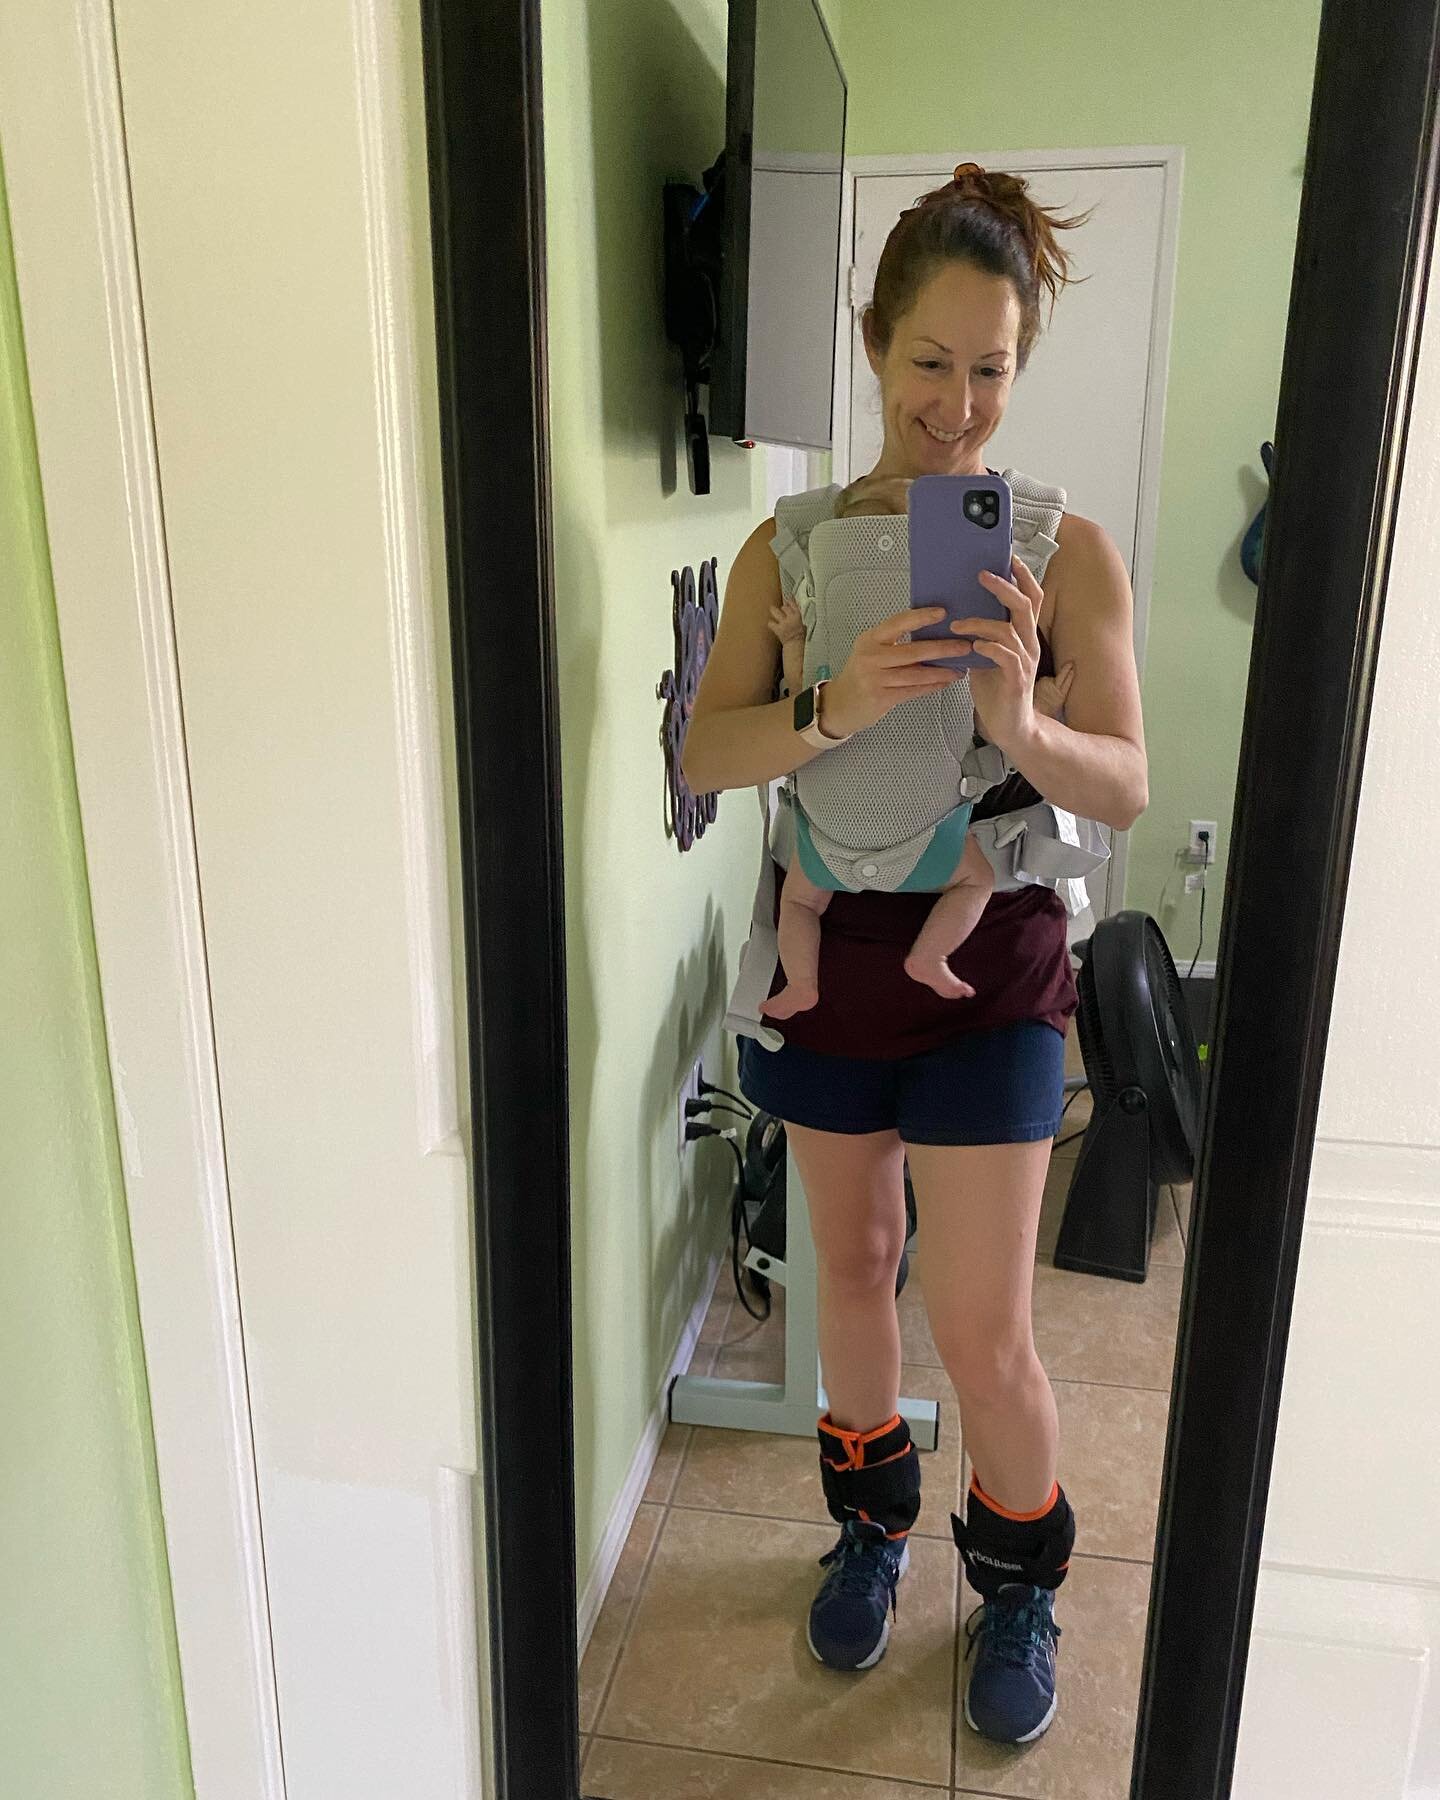 Baby refusing to nap + determination to workout = ankle weights and baby wearing all afternoon 🤷🏼&zwj;♀️👶🏼👍🏻 

#whateverittakes #fitness #ﬁtness #postpartum #10weeksold #babygirl #gymbuddy #naptime #workout #fitnessjourney #workoutmotivation #g